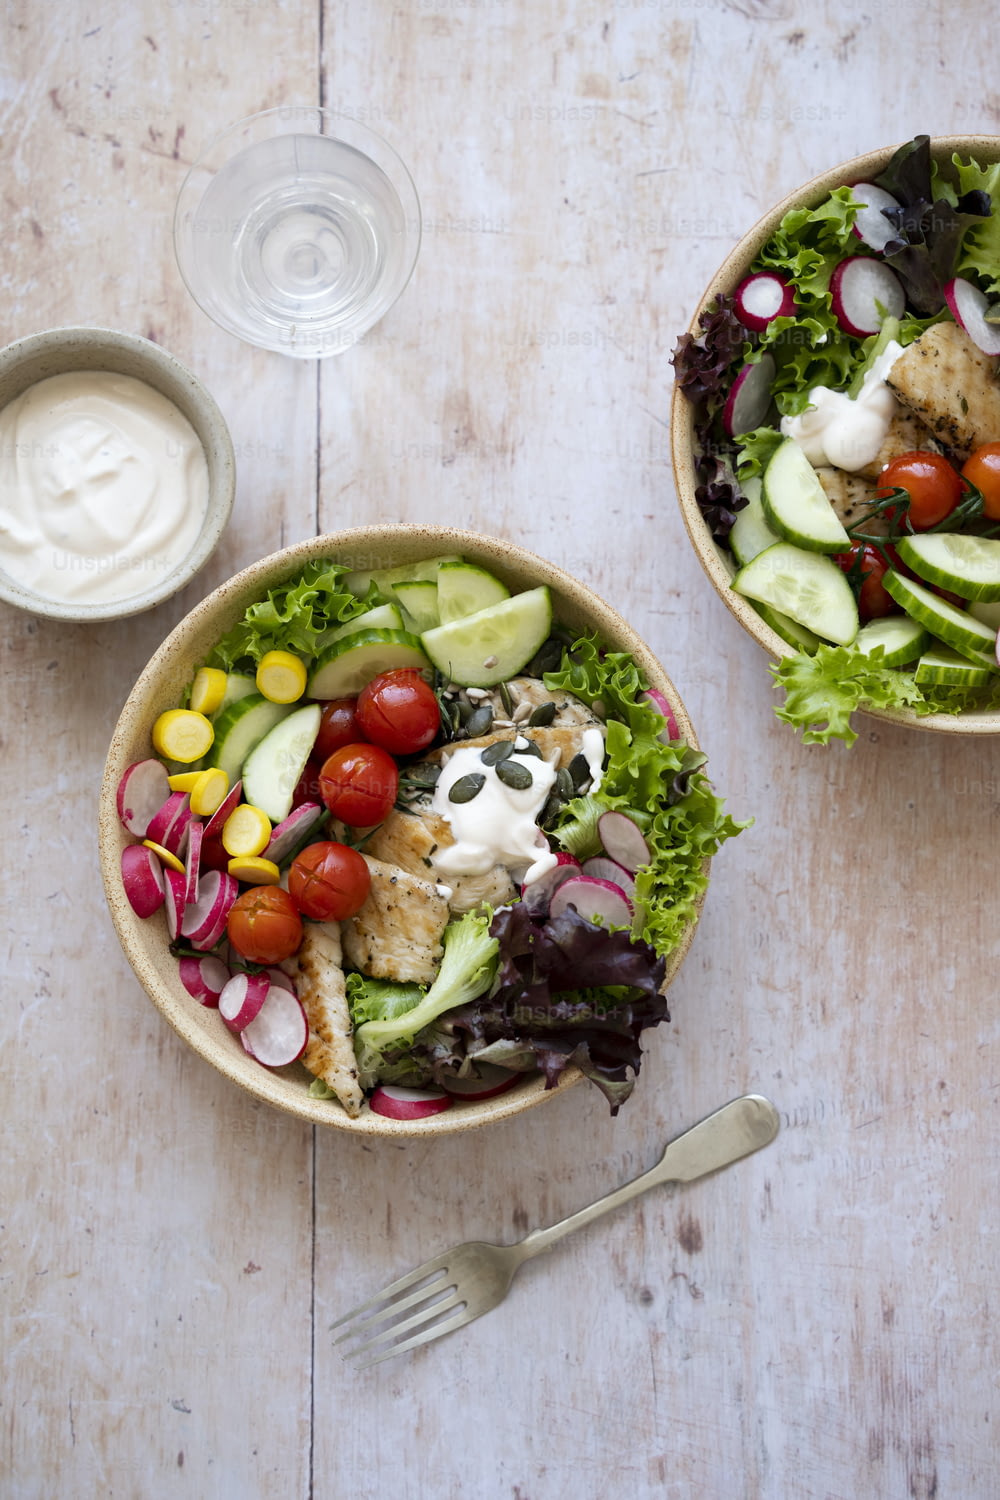 two bowls of salad with dressing on the side